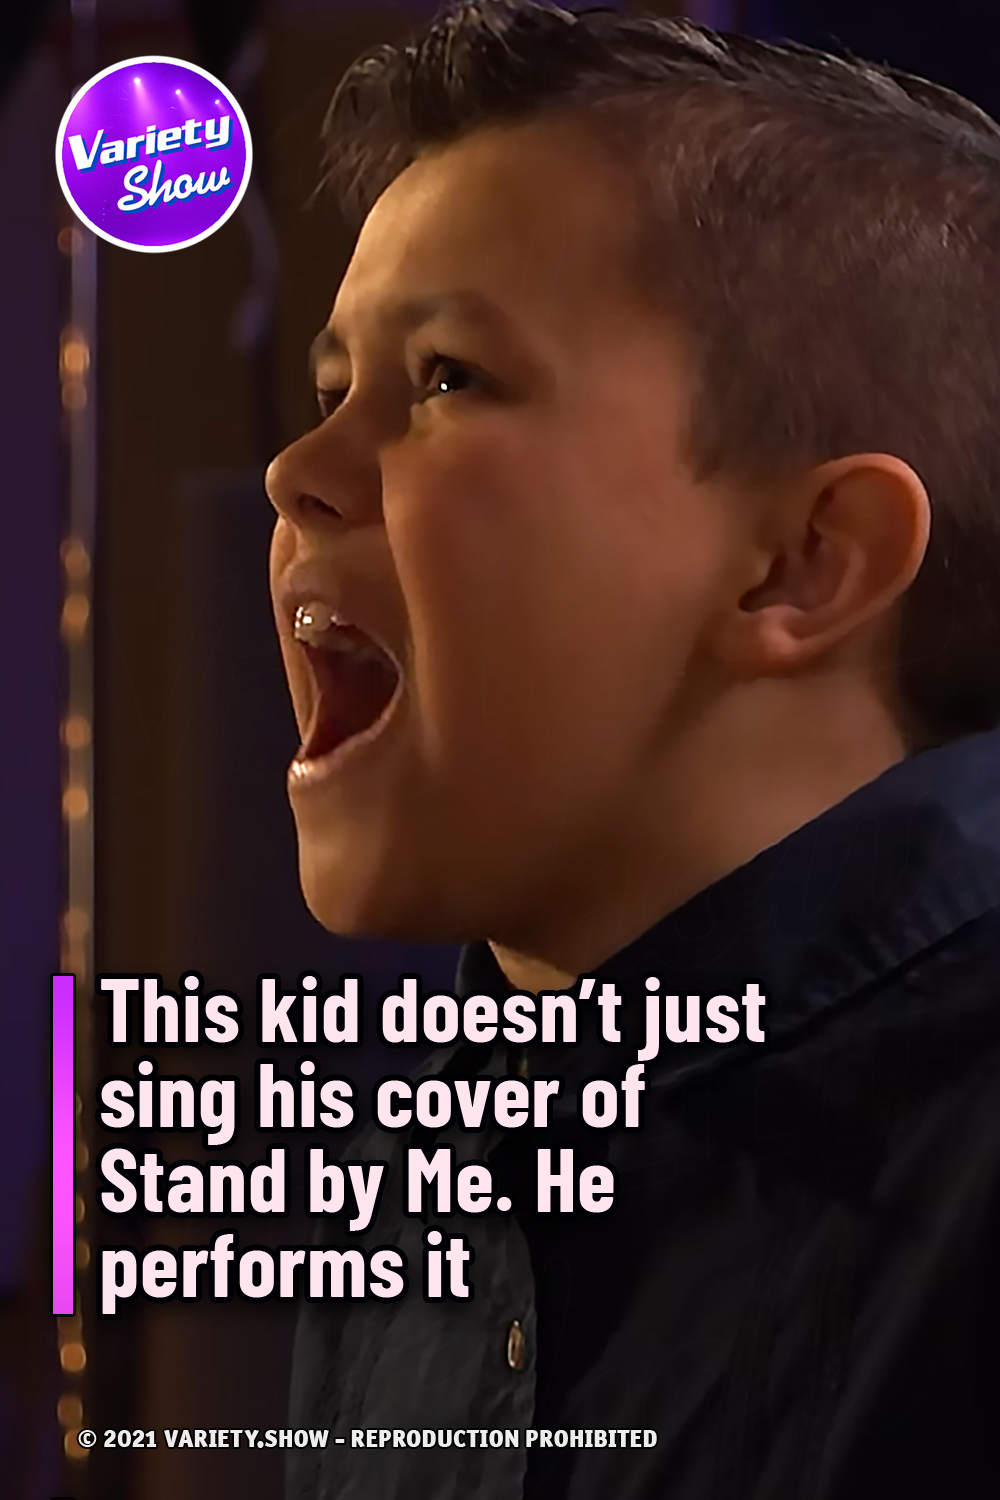 This kid doesn’t just sing his cover of Stand by Me. He performs it